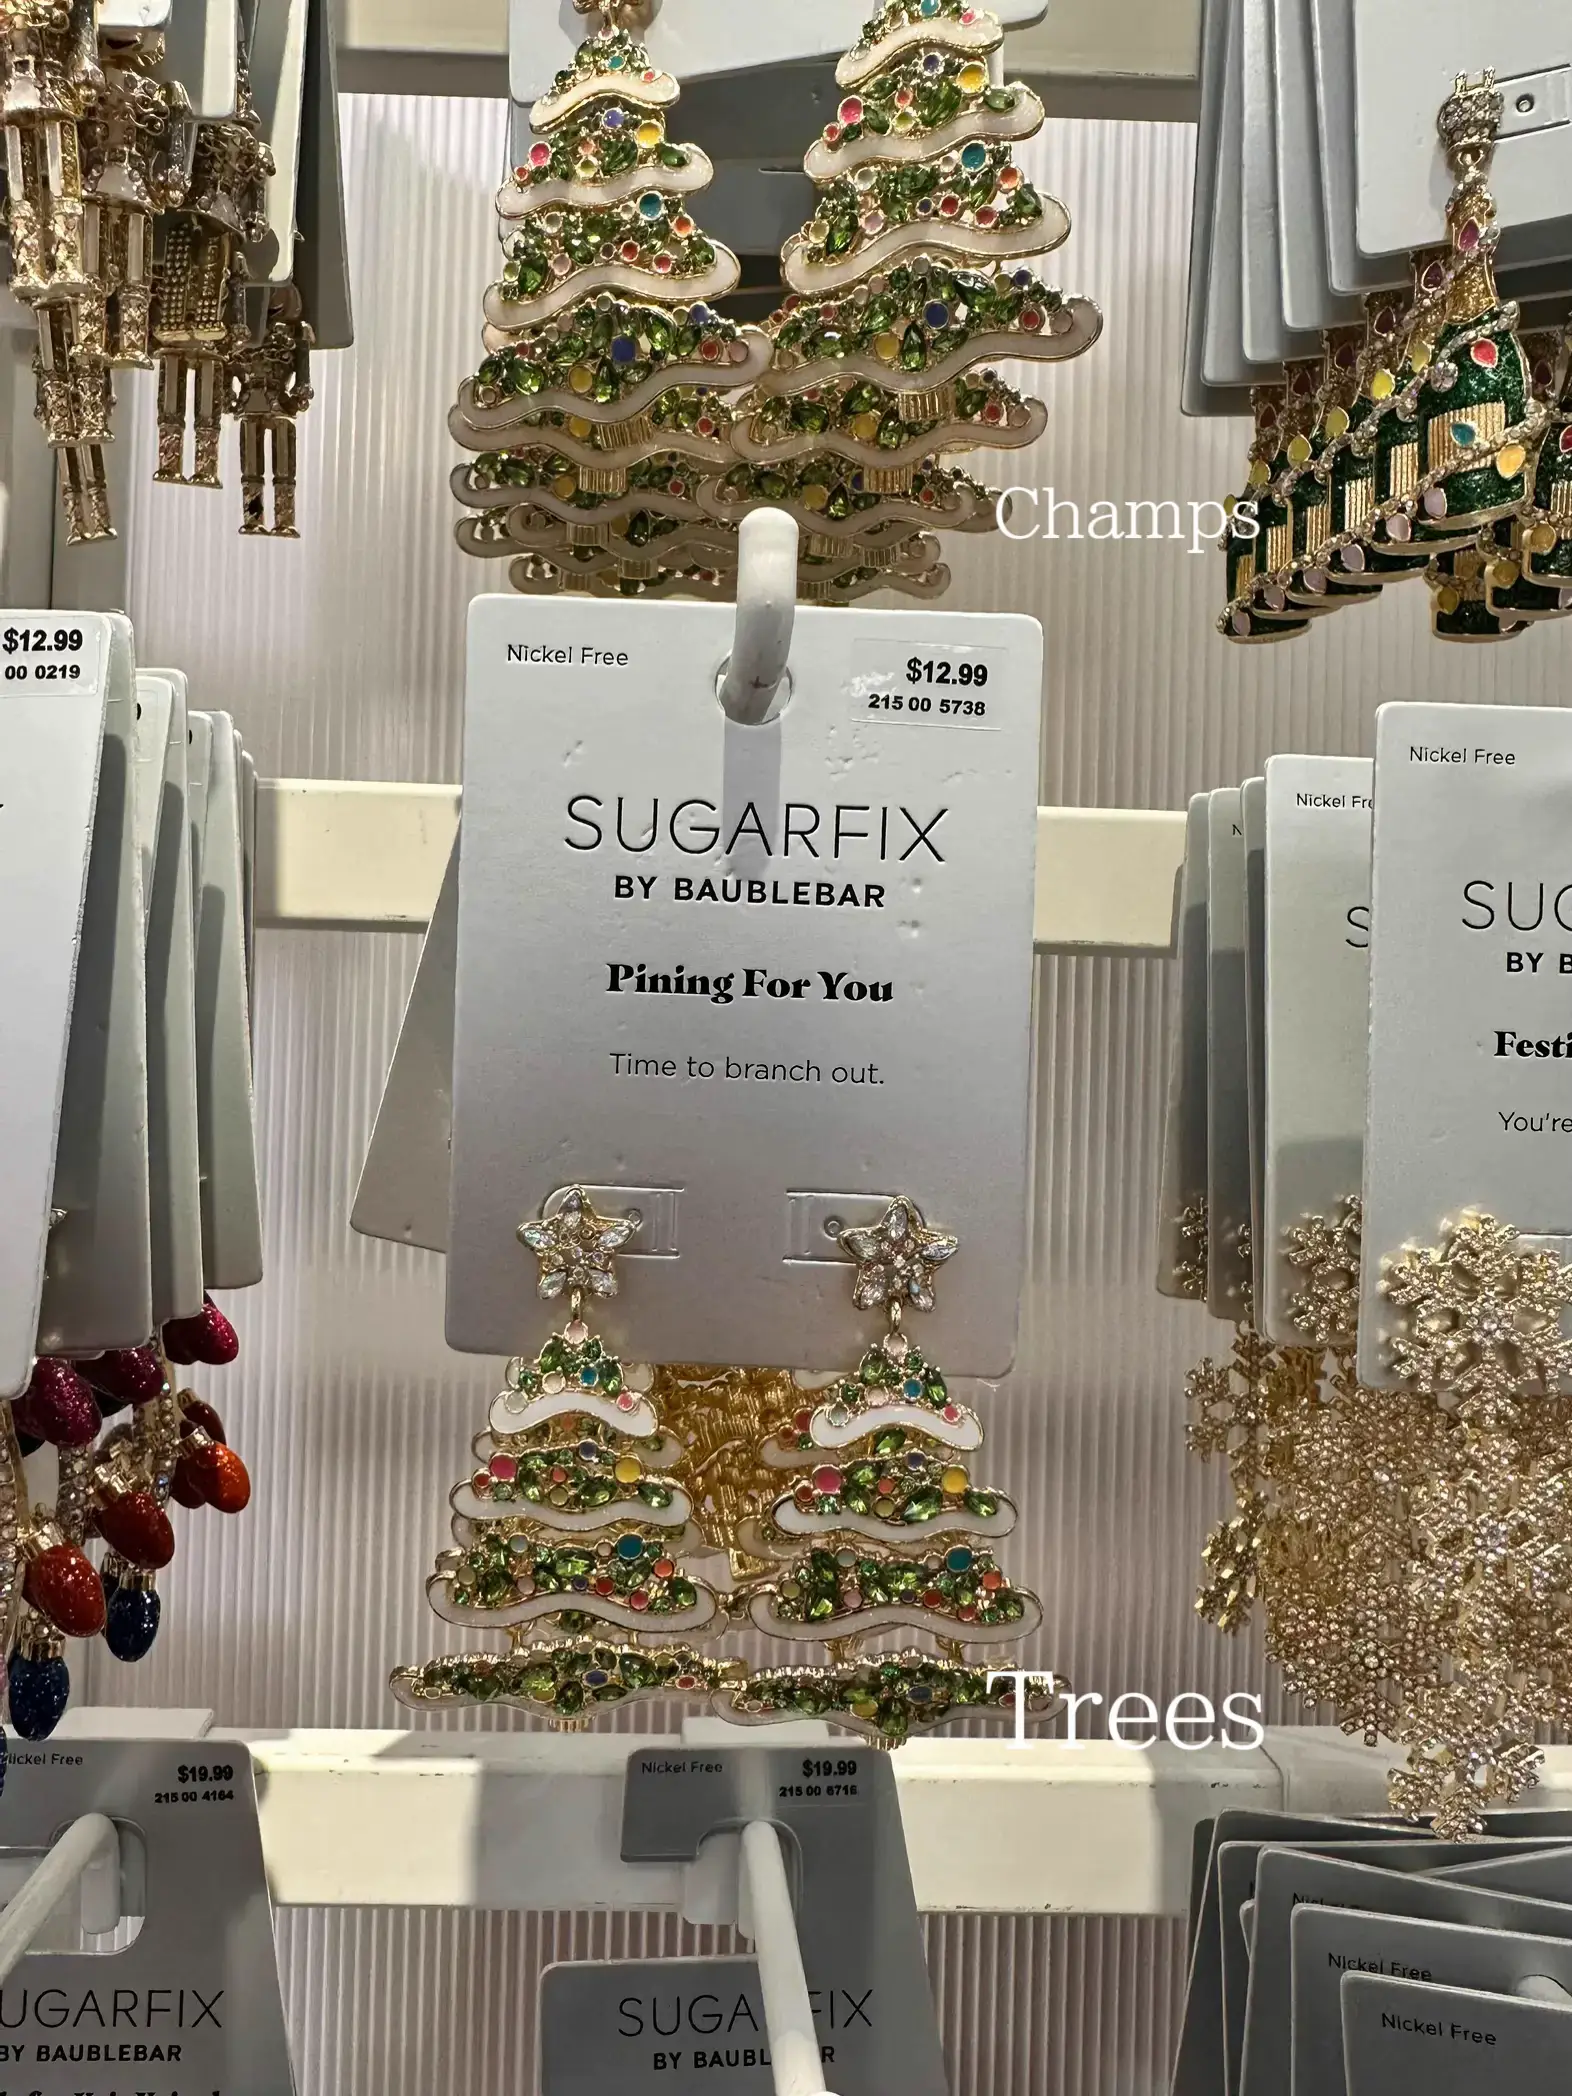  A display of Christmas ornaments and trees.